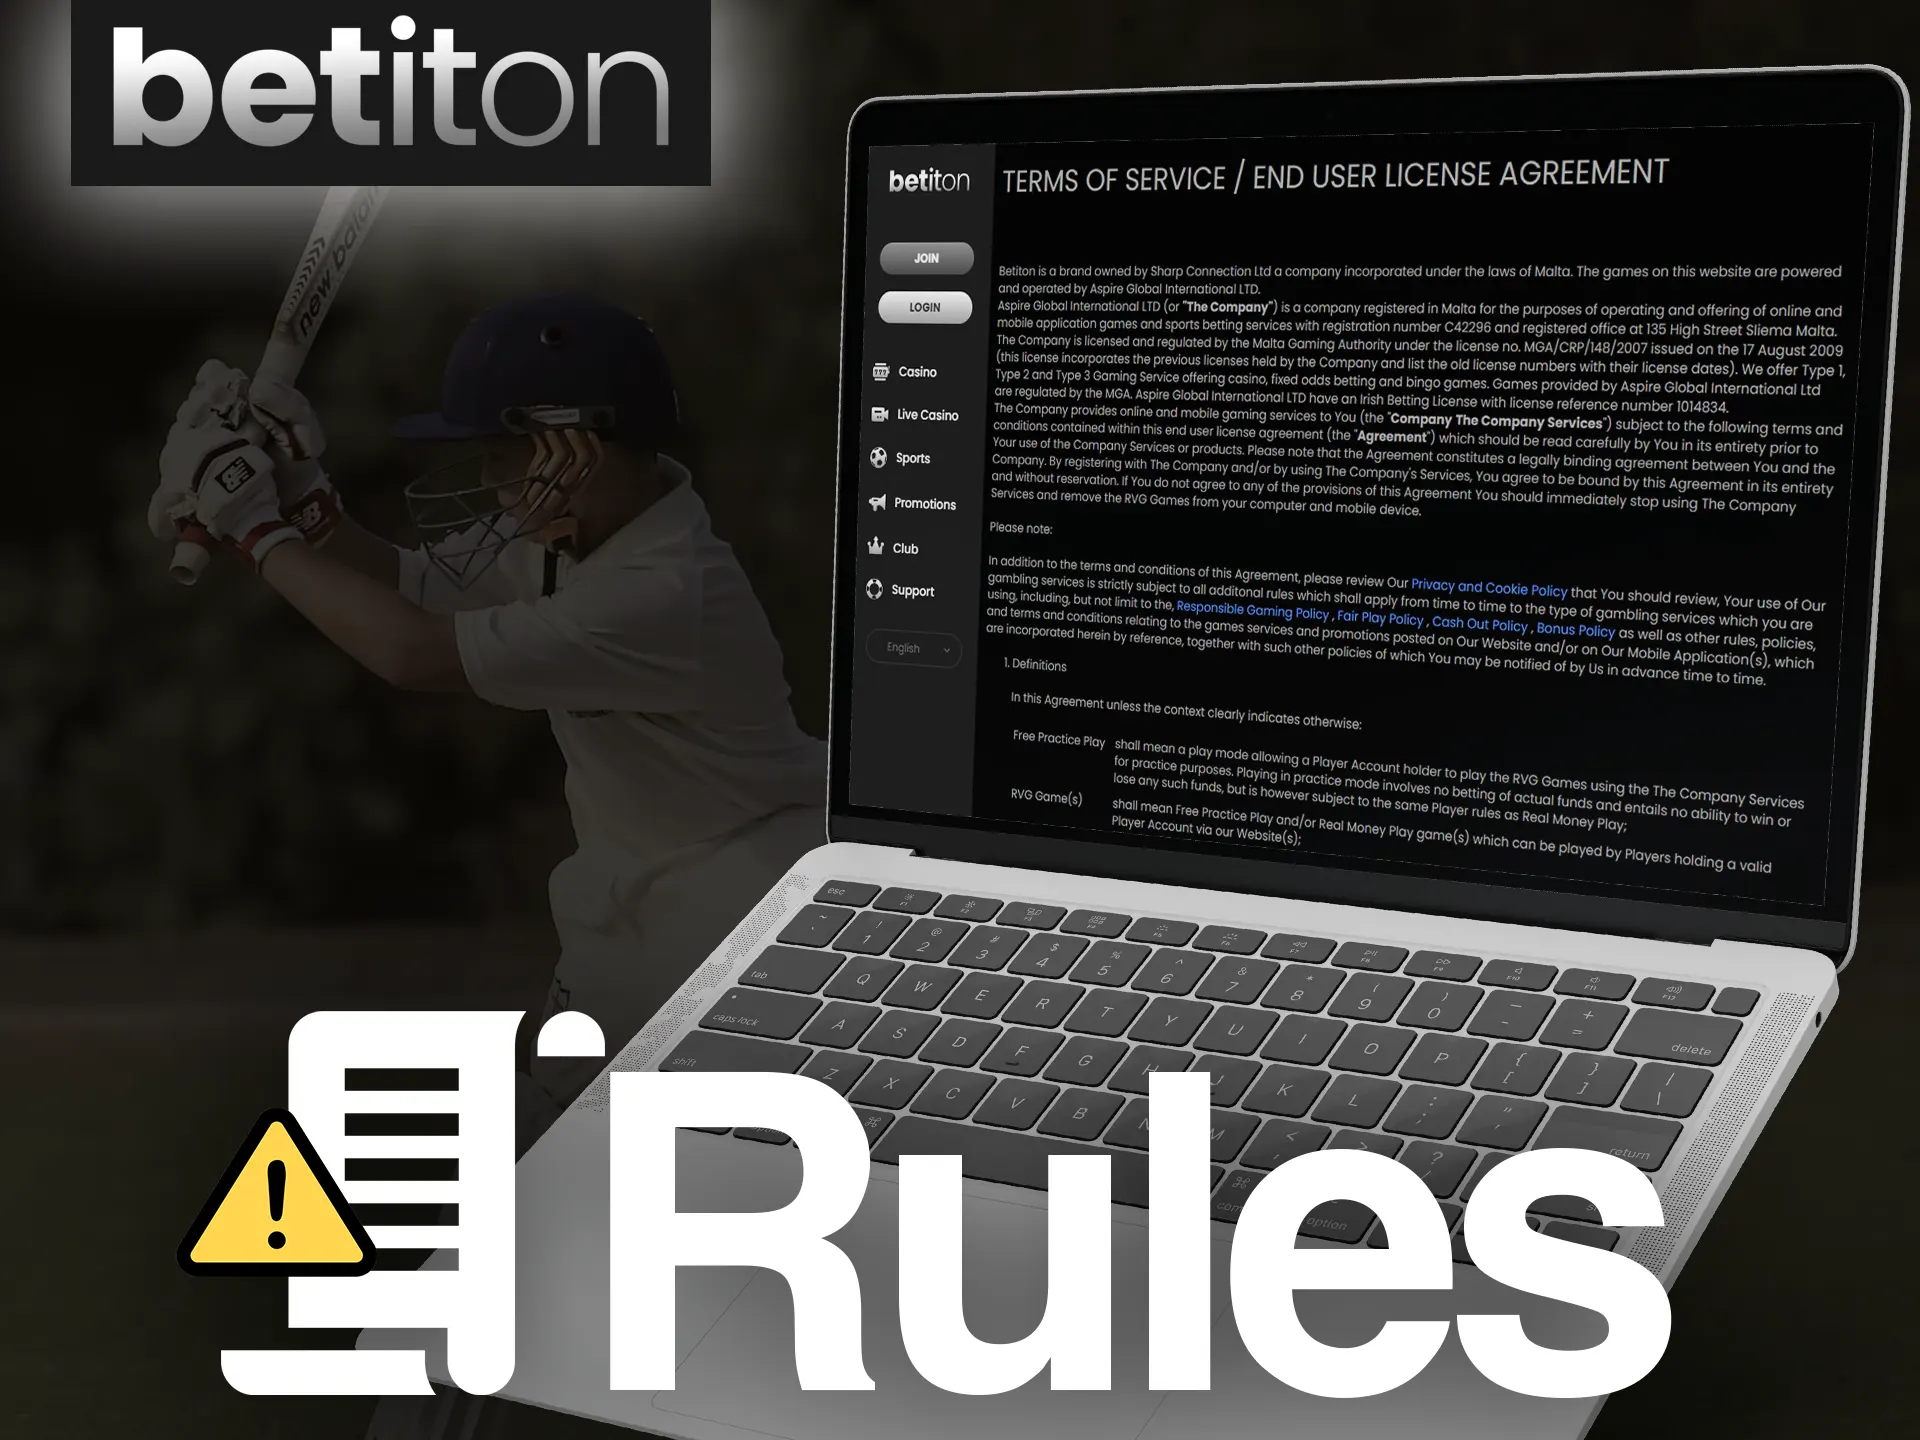 Follow Betiton rules when you making bets and playing casino games.